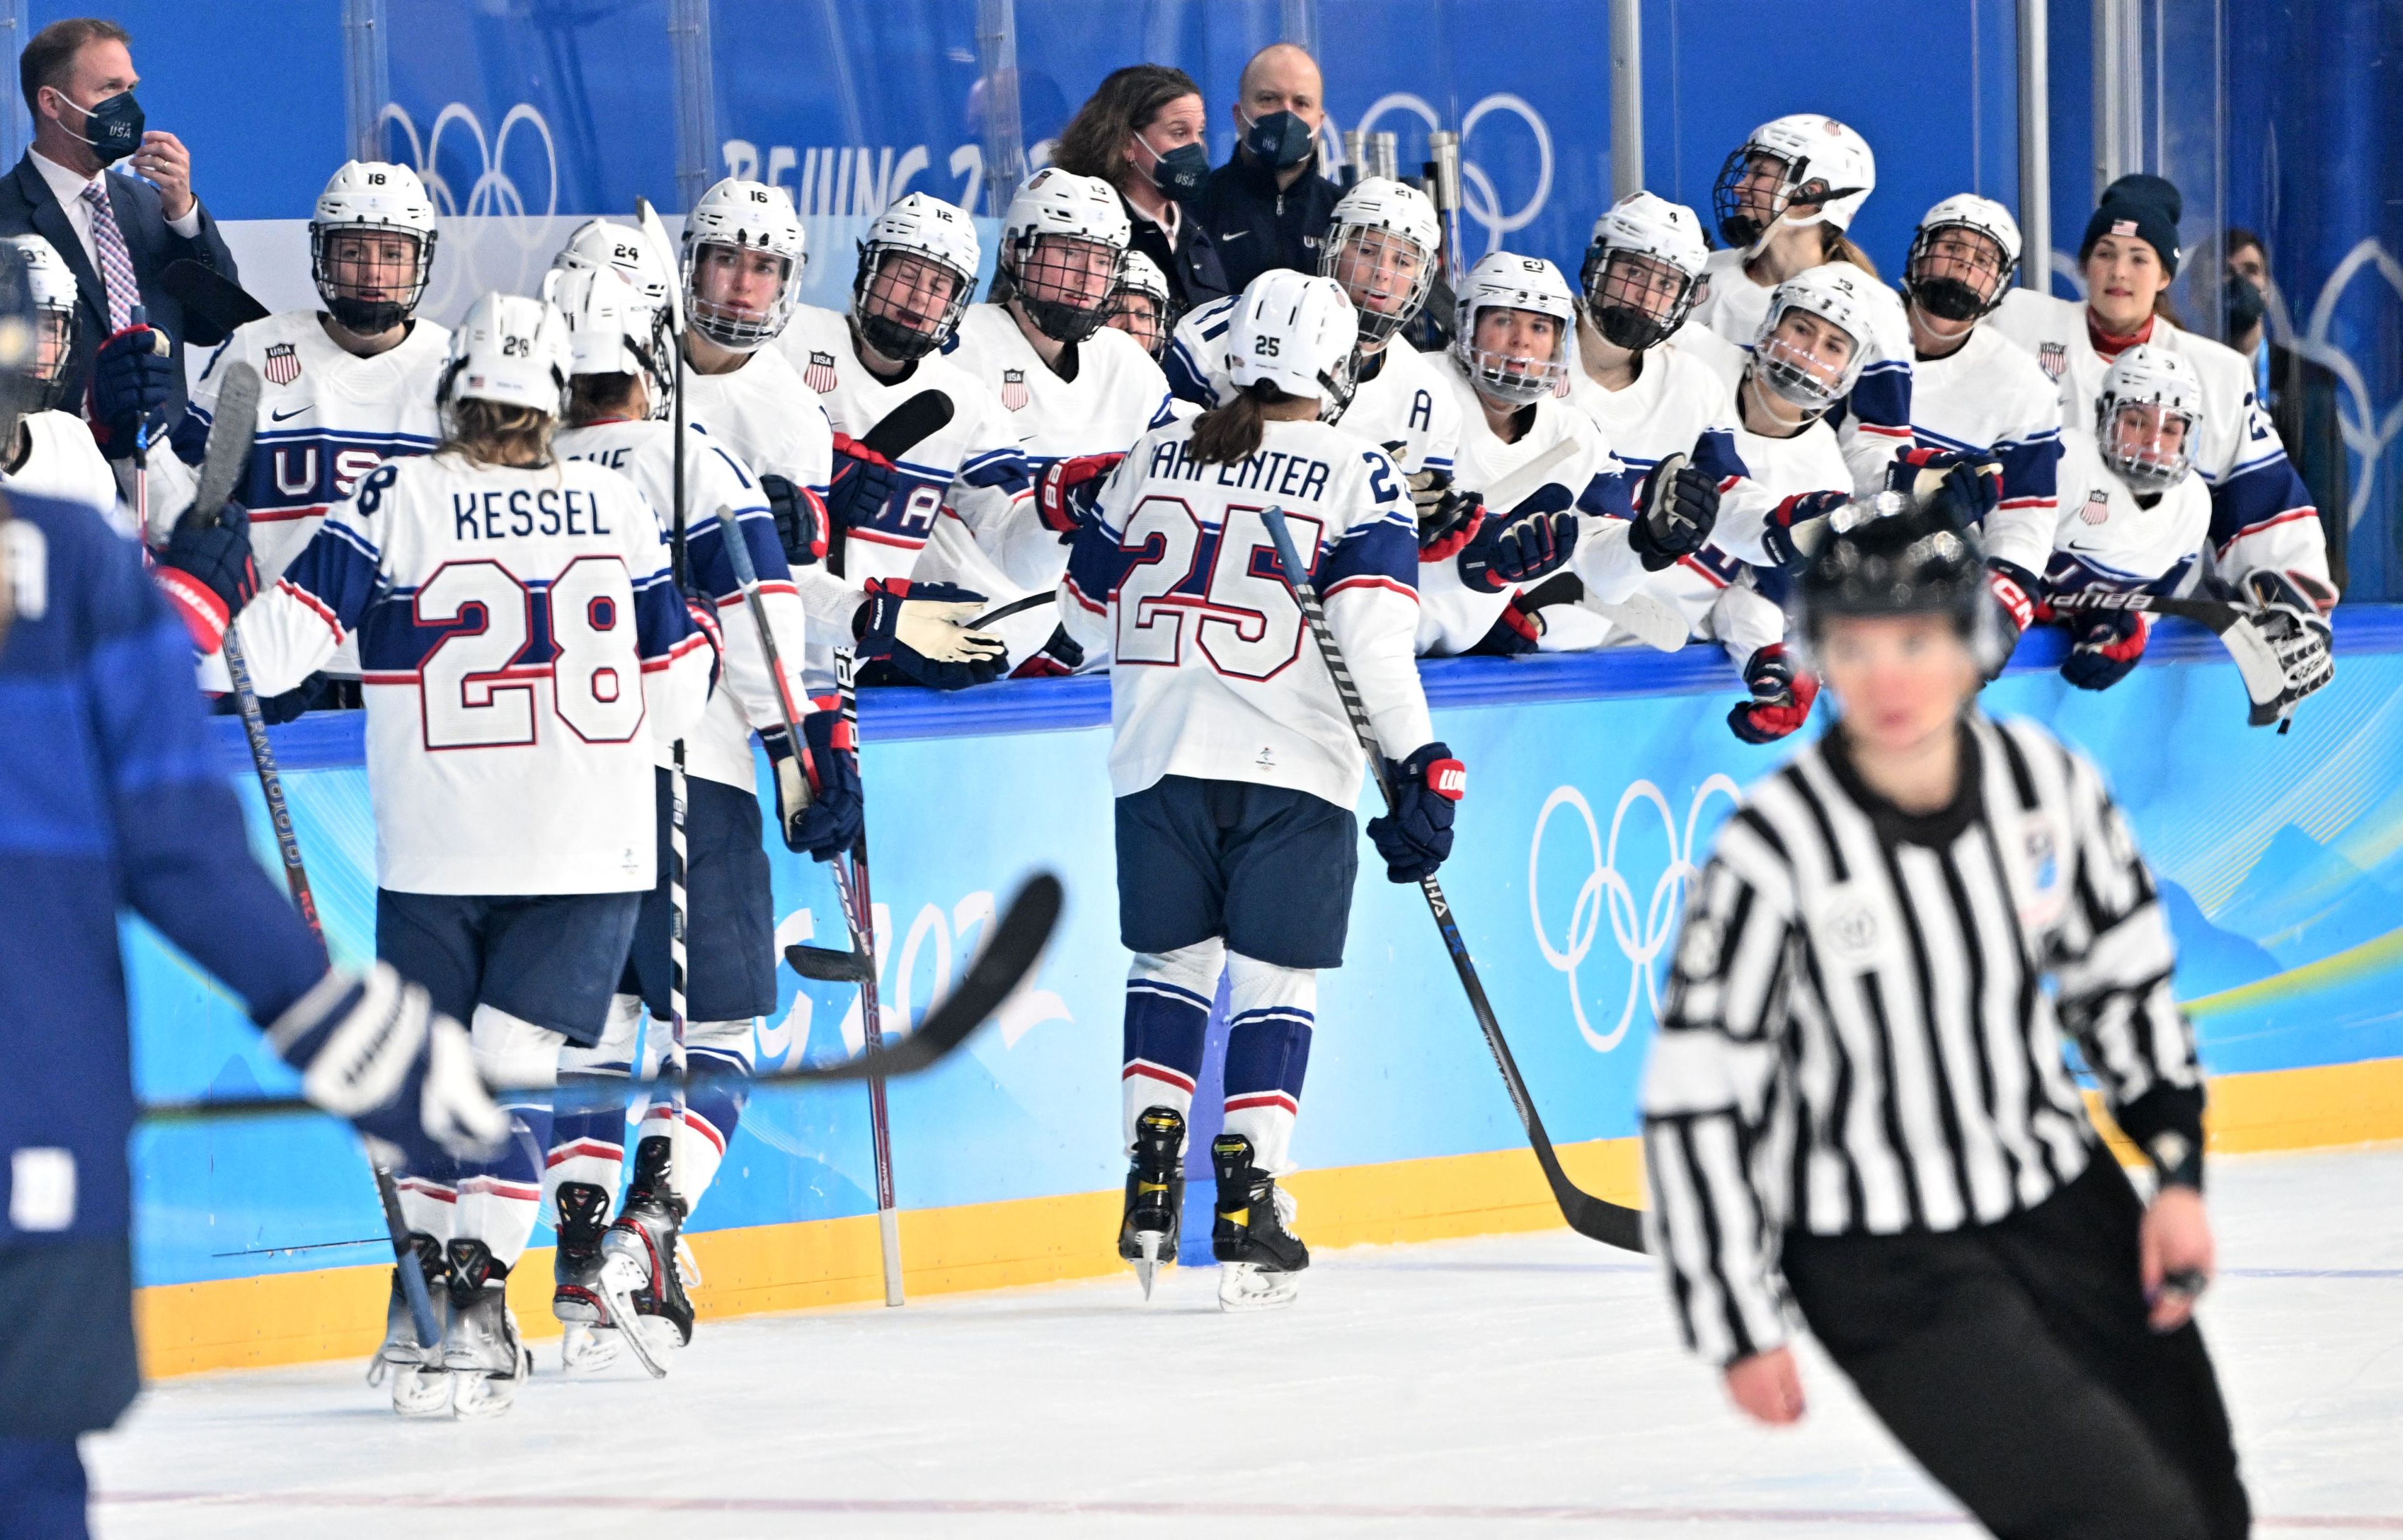 USA's Alexandra Carpenter (C) celebrates with teammates on the bench after scoring a goal against Finland during their women's preliminary round group A match of the Beijing 2022 Winter Olympic Games ice hockey competition, at the Wukesong Sports Centre in Beijing on February 3, 2022.